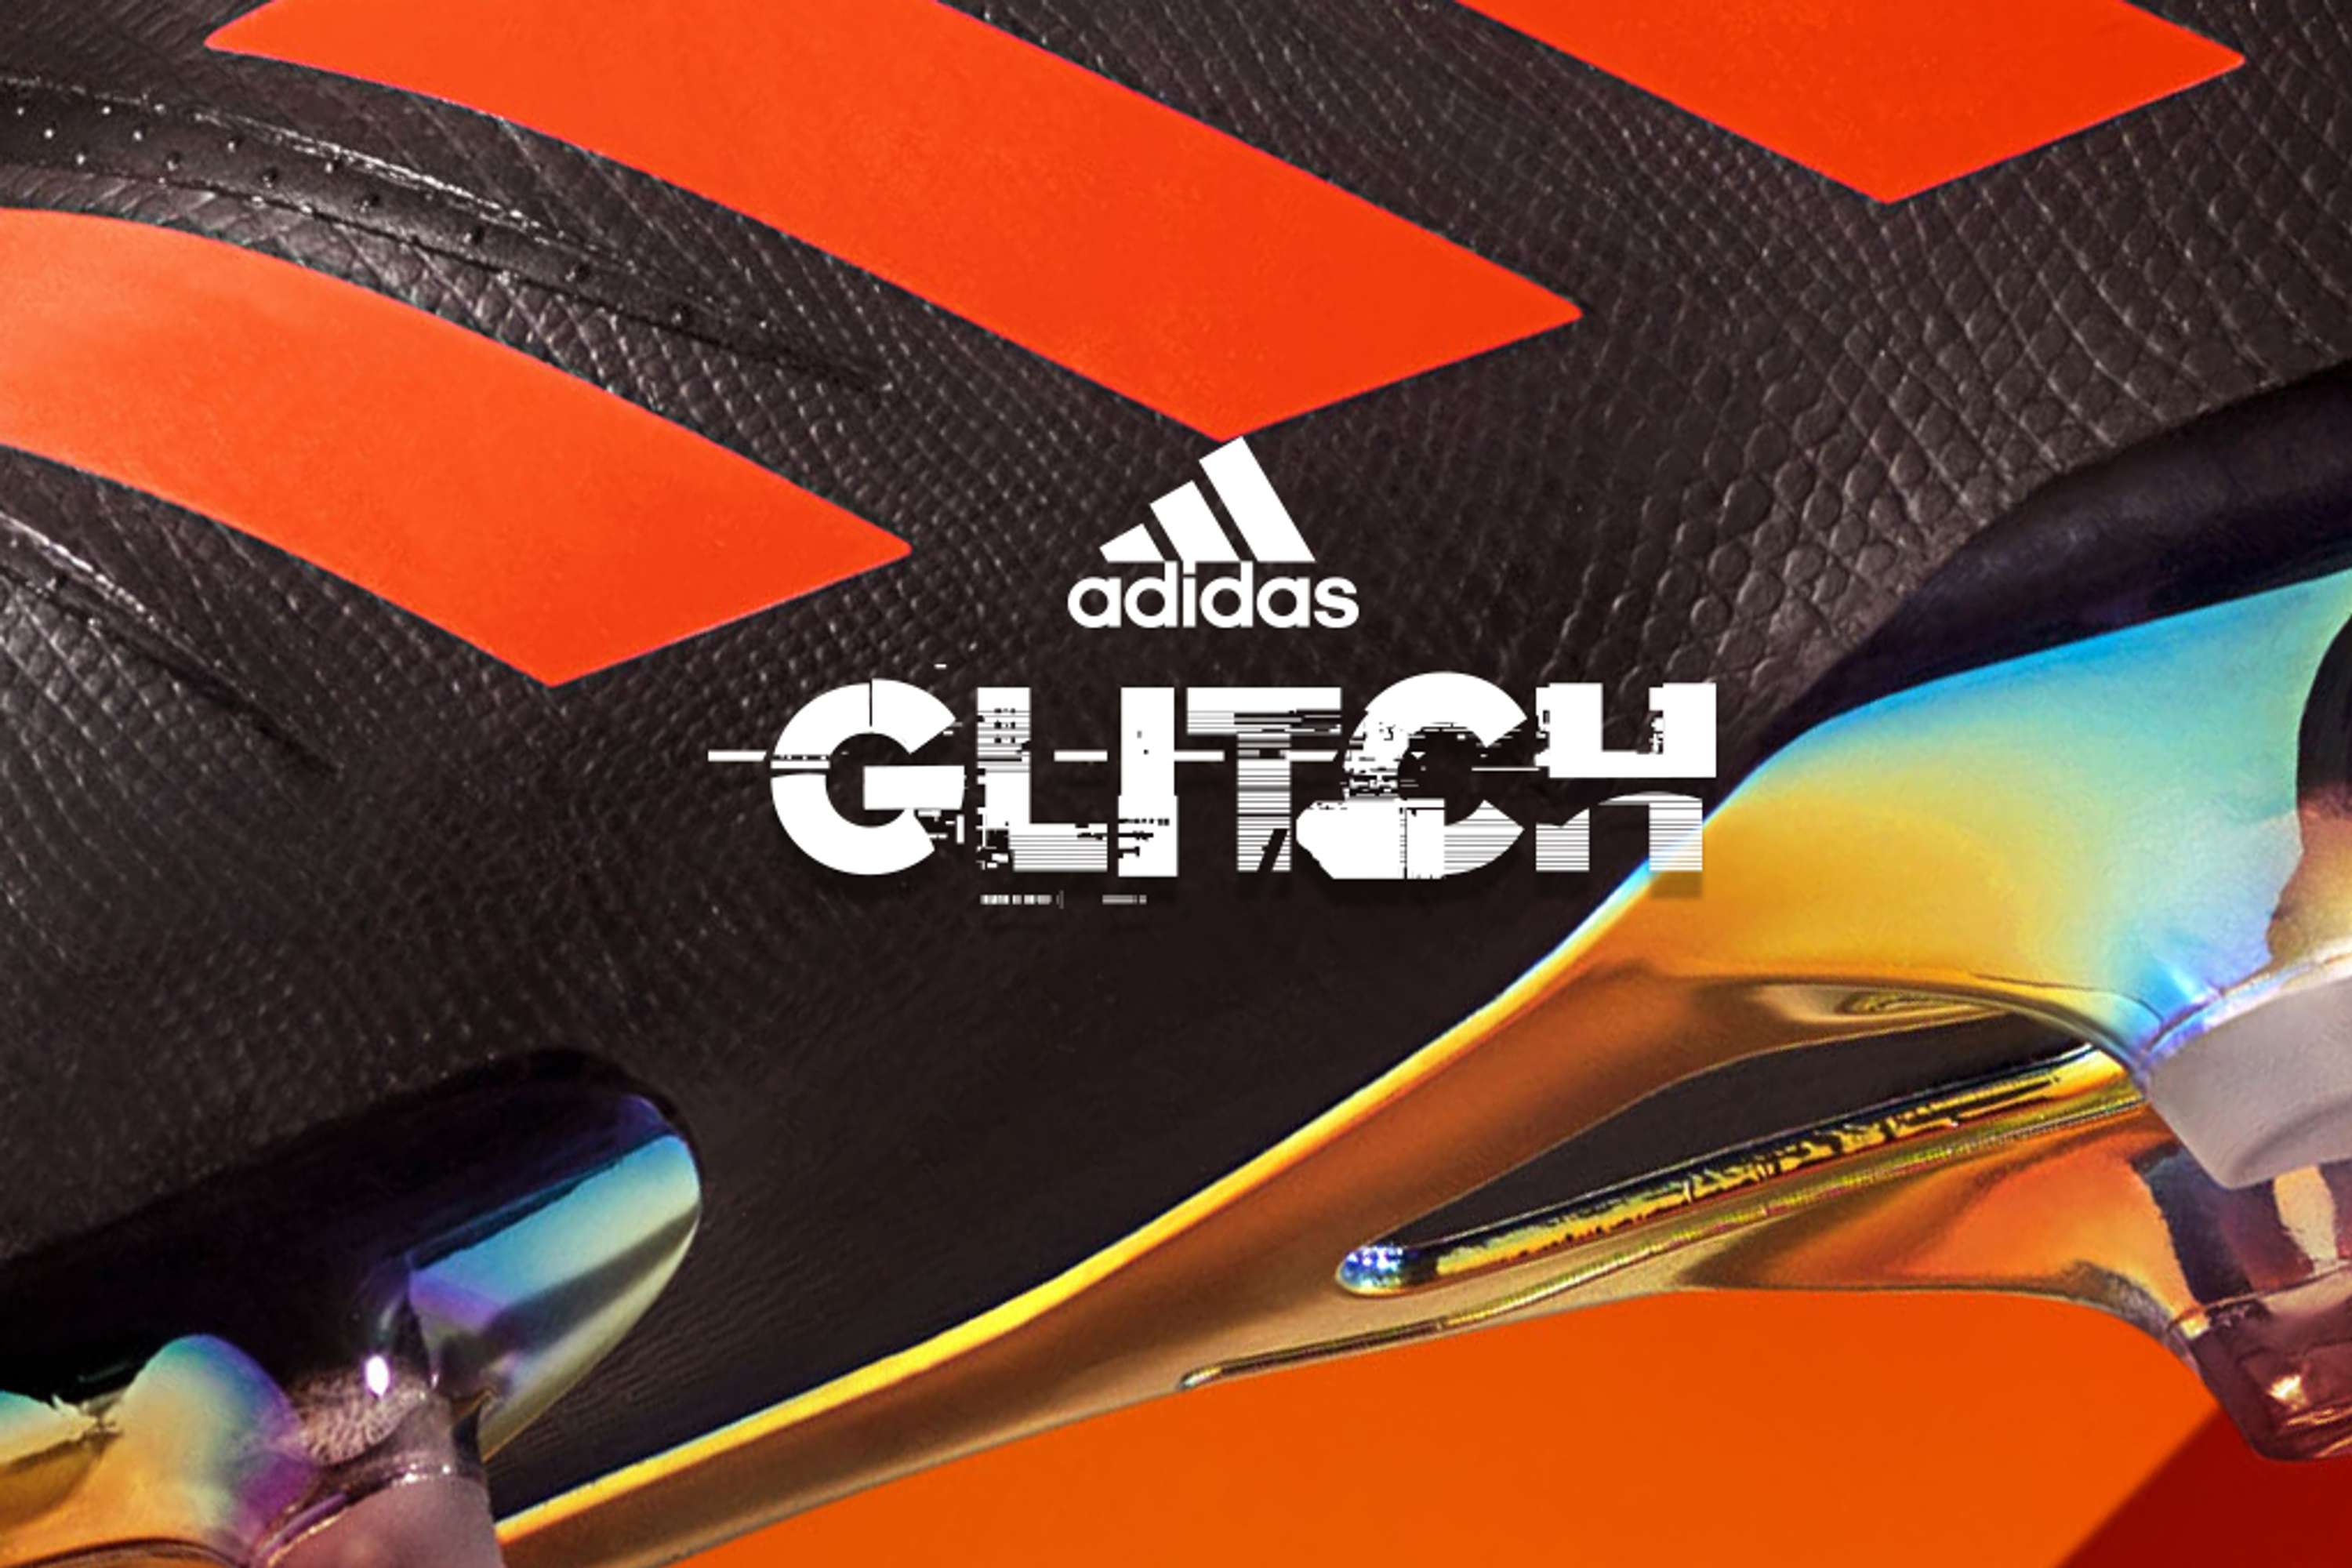 Strategy for adidas Glitch Product Launch | The Dots